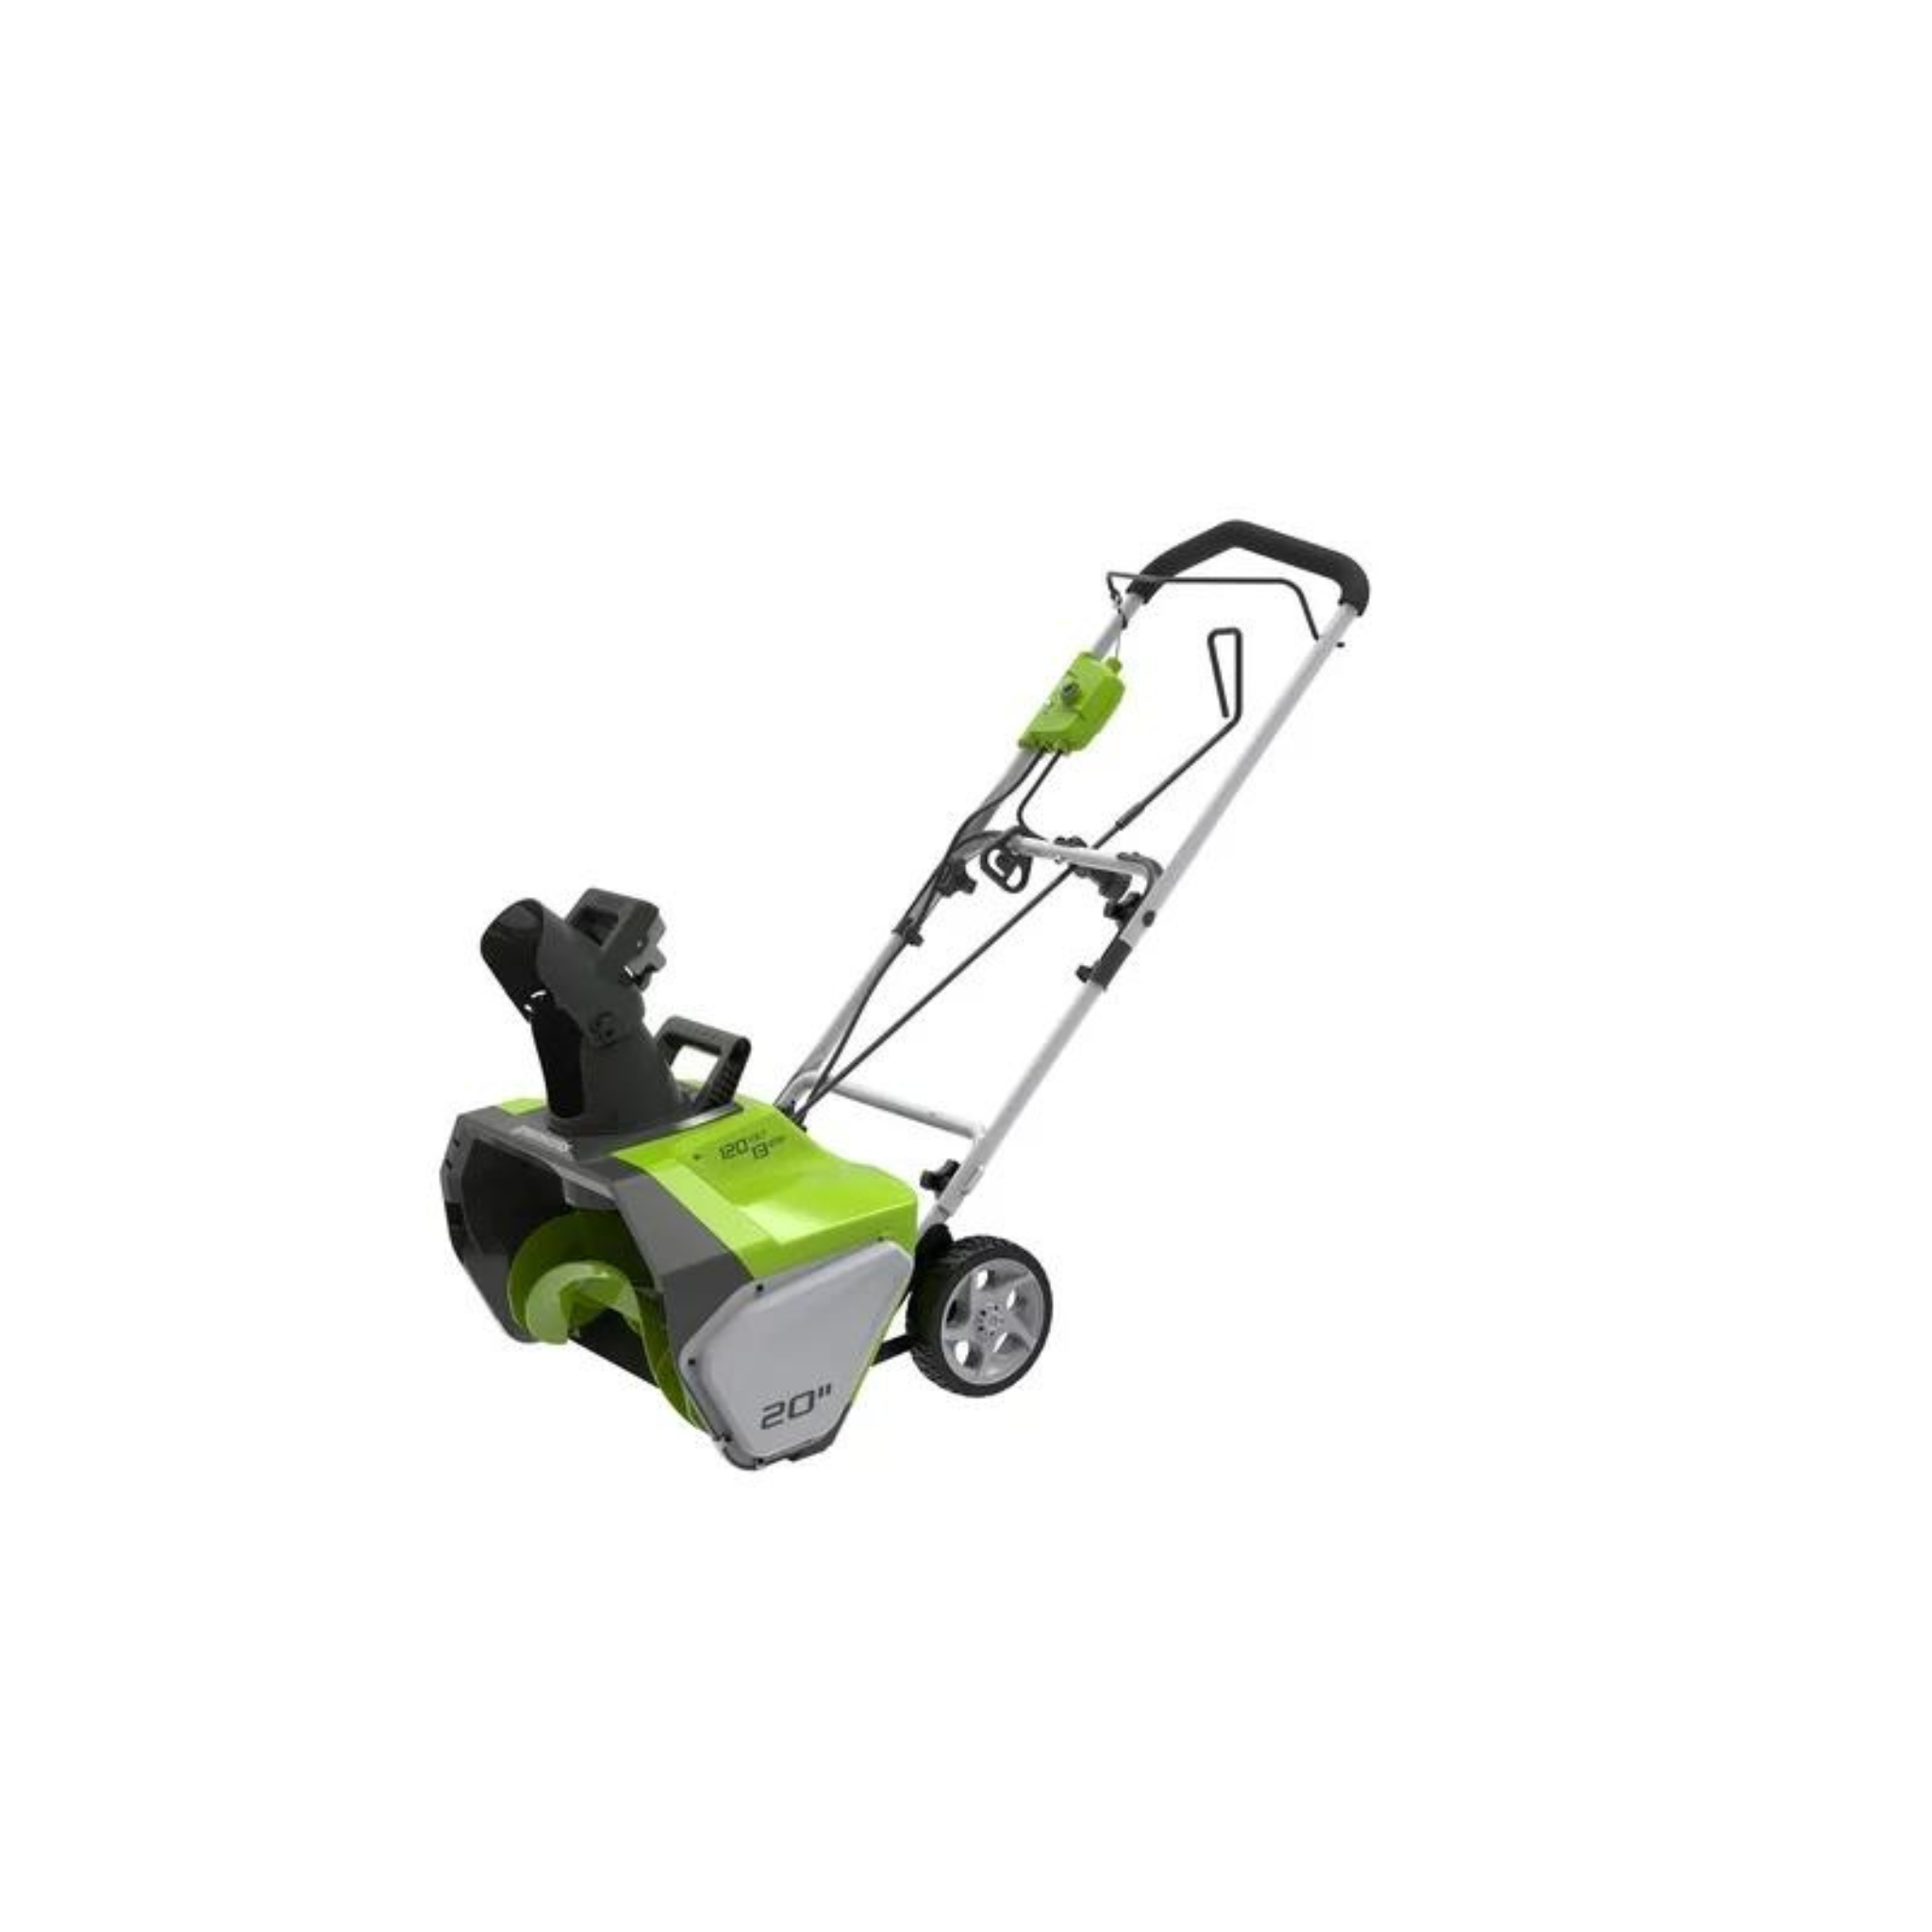 GreenWorks 13 Amp 20" Electric Corded Snow Thrower